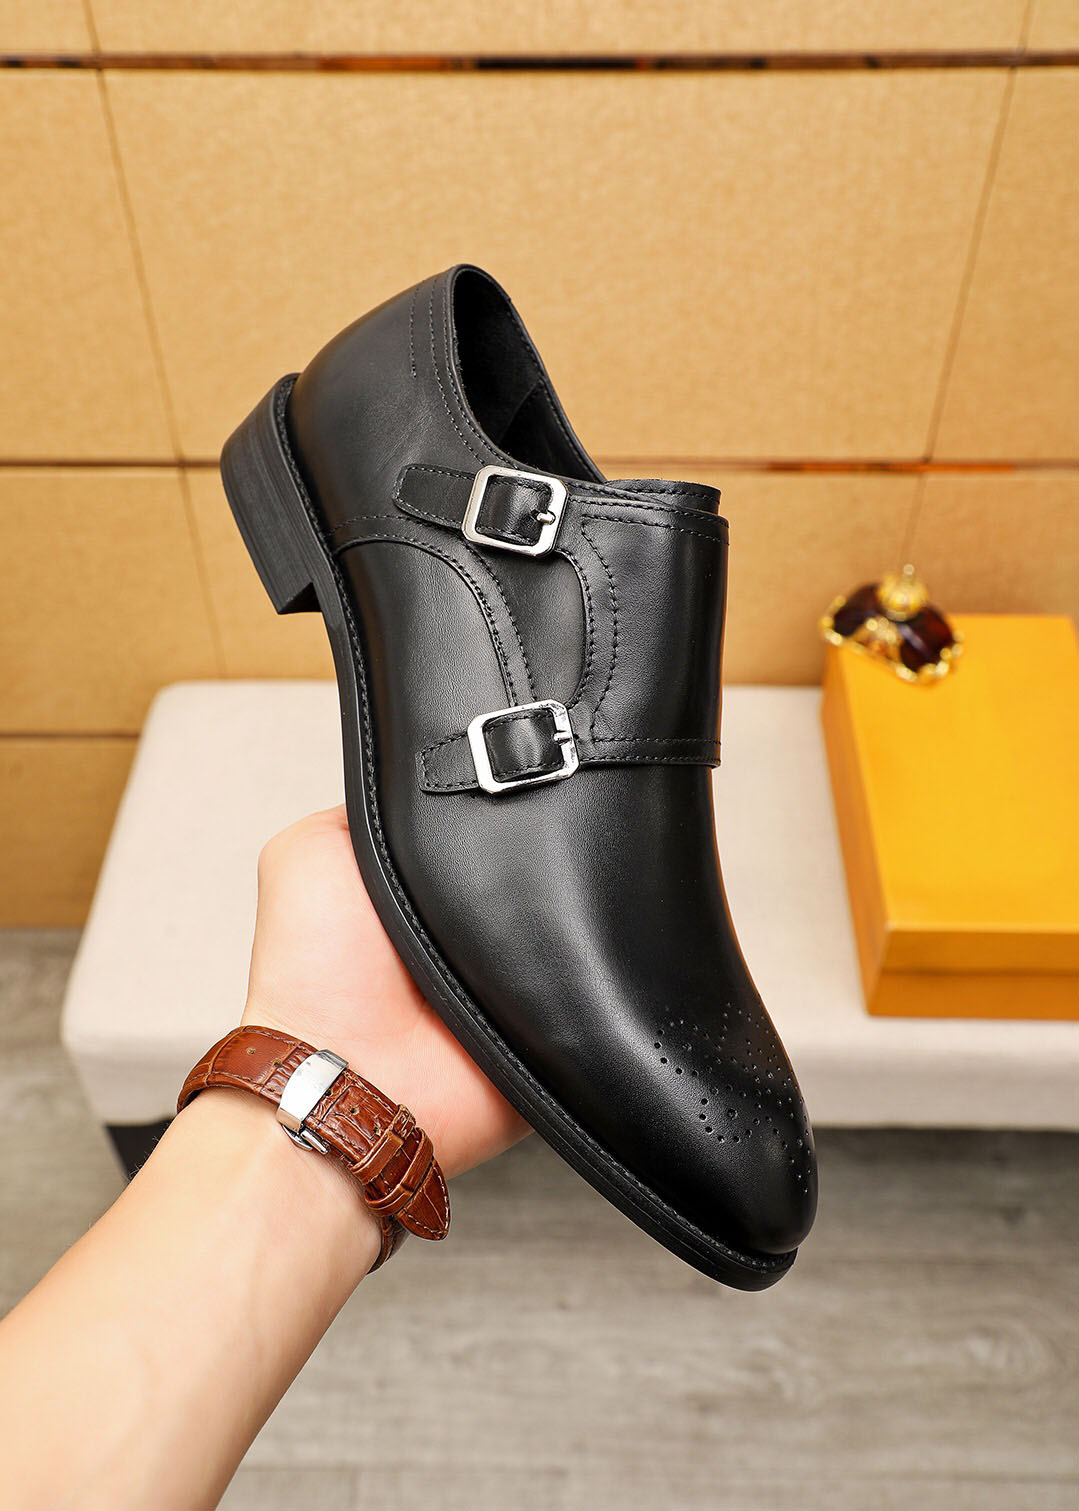 2023 Mens Dress Shoes Designer Fashion Genuine Leather Business Office Work Formal Loafers Male Brand Designer Party Wedding Flats Size 38-46